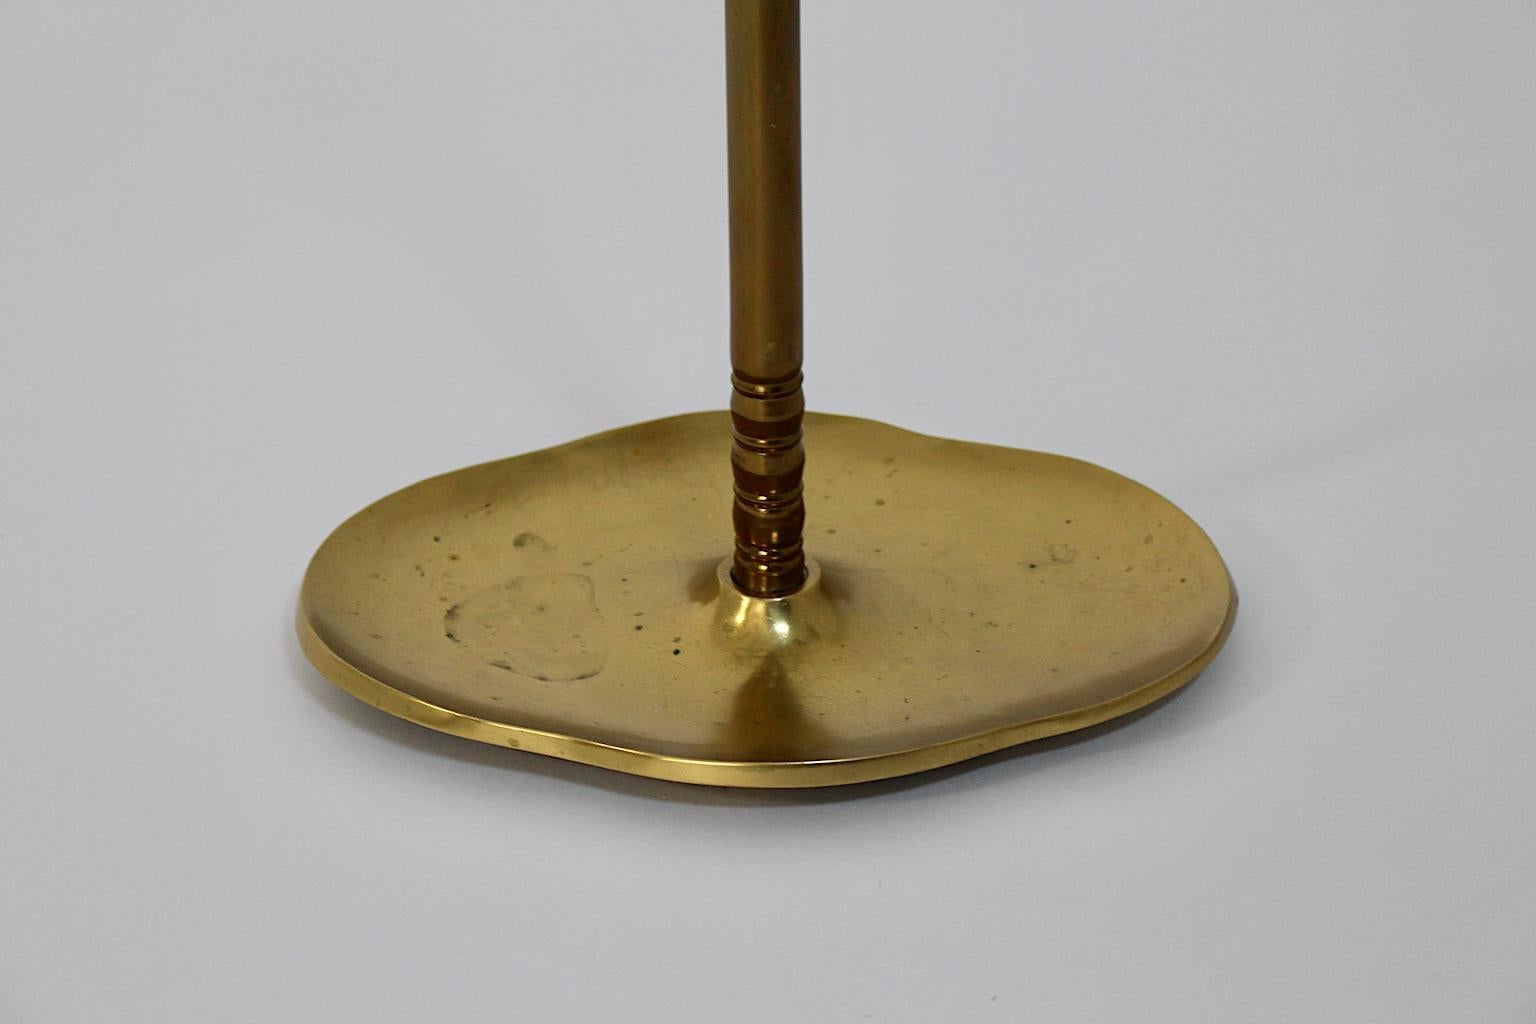 Italian Hollywood Regency Style Vintage Brass Umbrella Stand Cane Holder 1970s Italy For Sale